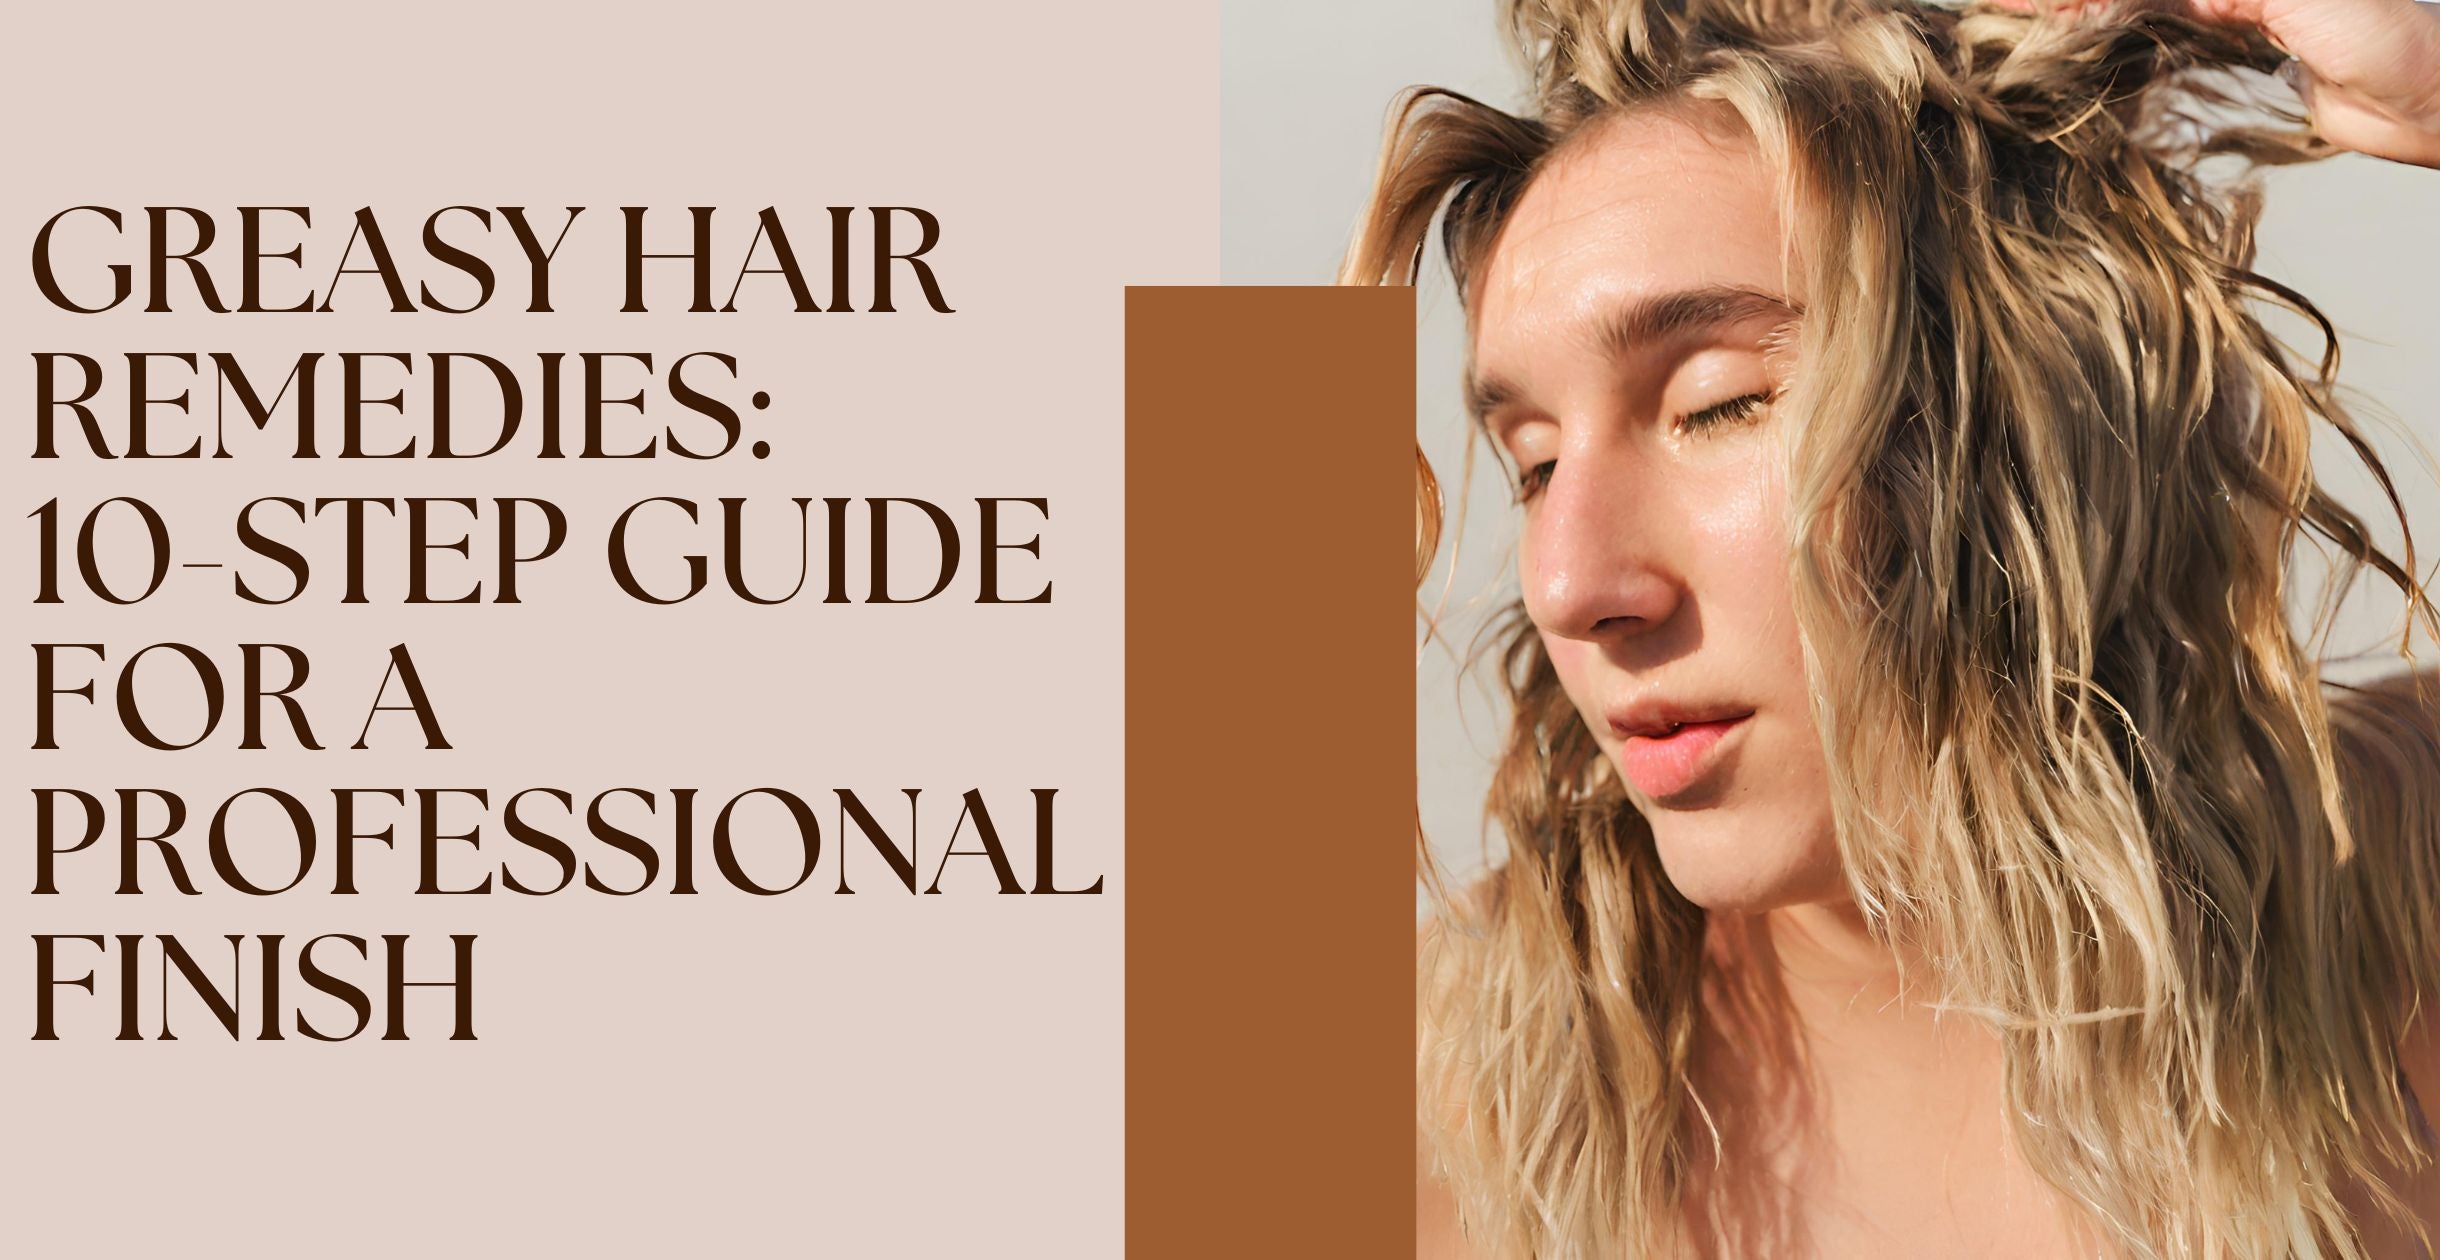 Greasy hair remedies: 10-Step Guide for a Professional Finish